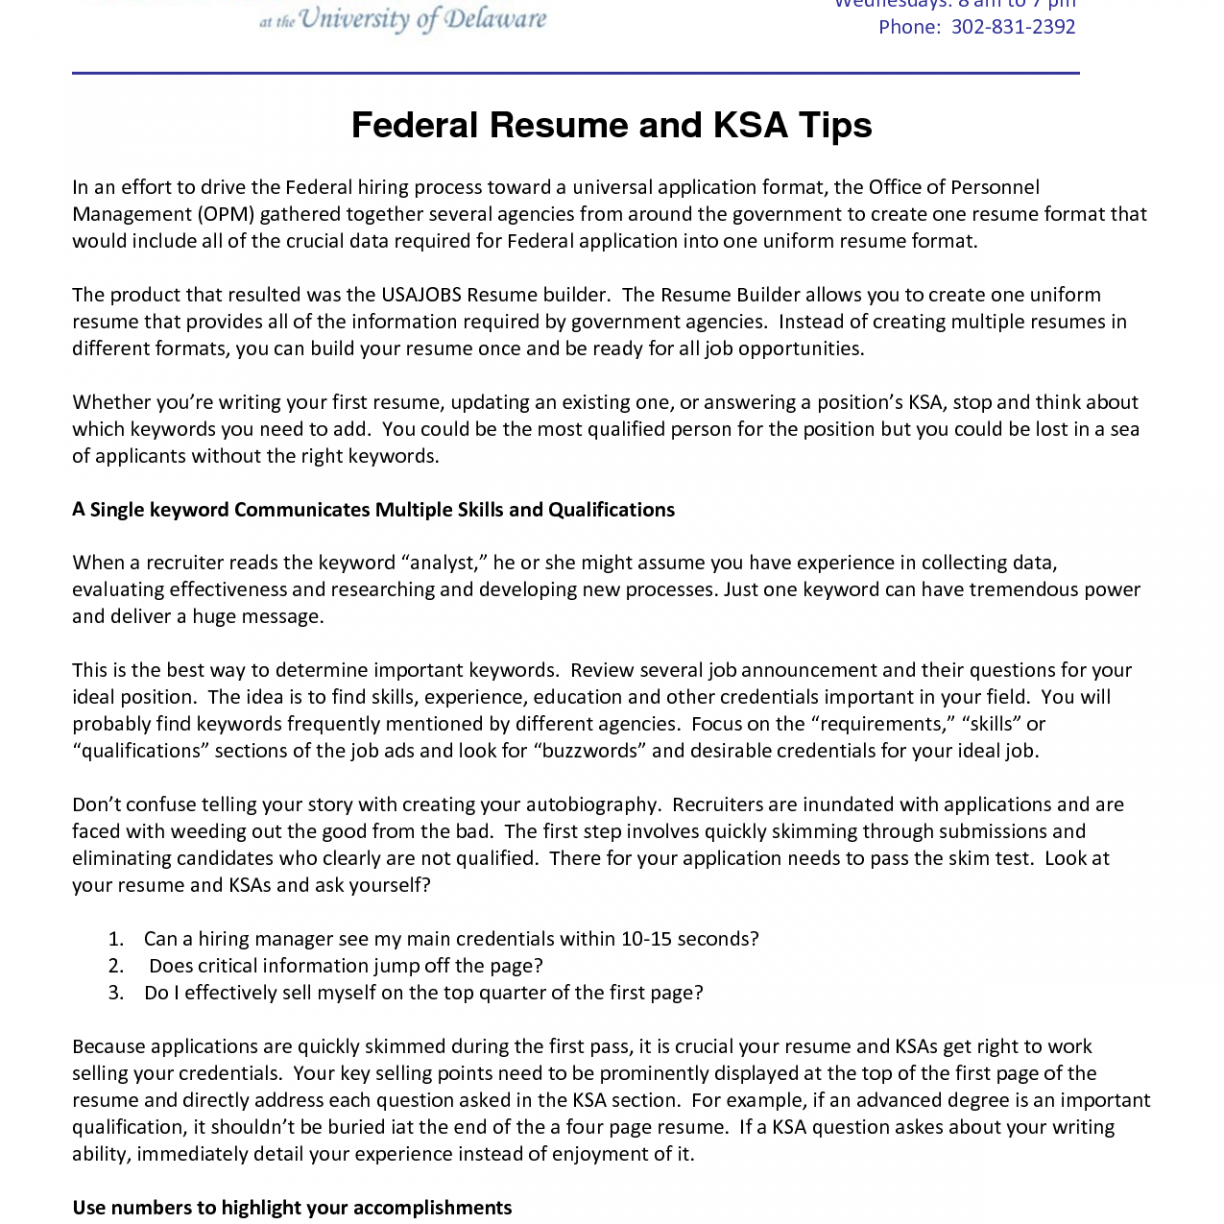 Federal Cover Letter Template - Usajobs Resume Builder Fabulous Federal Samples for Your Usa Jobs